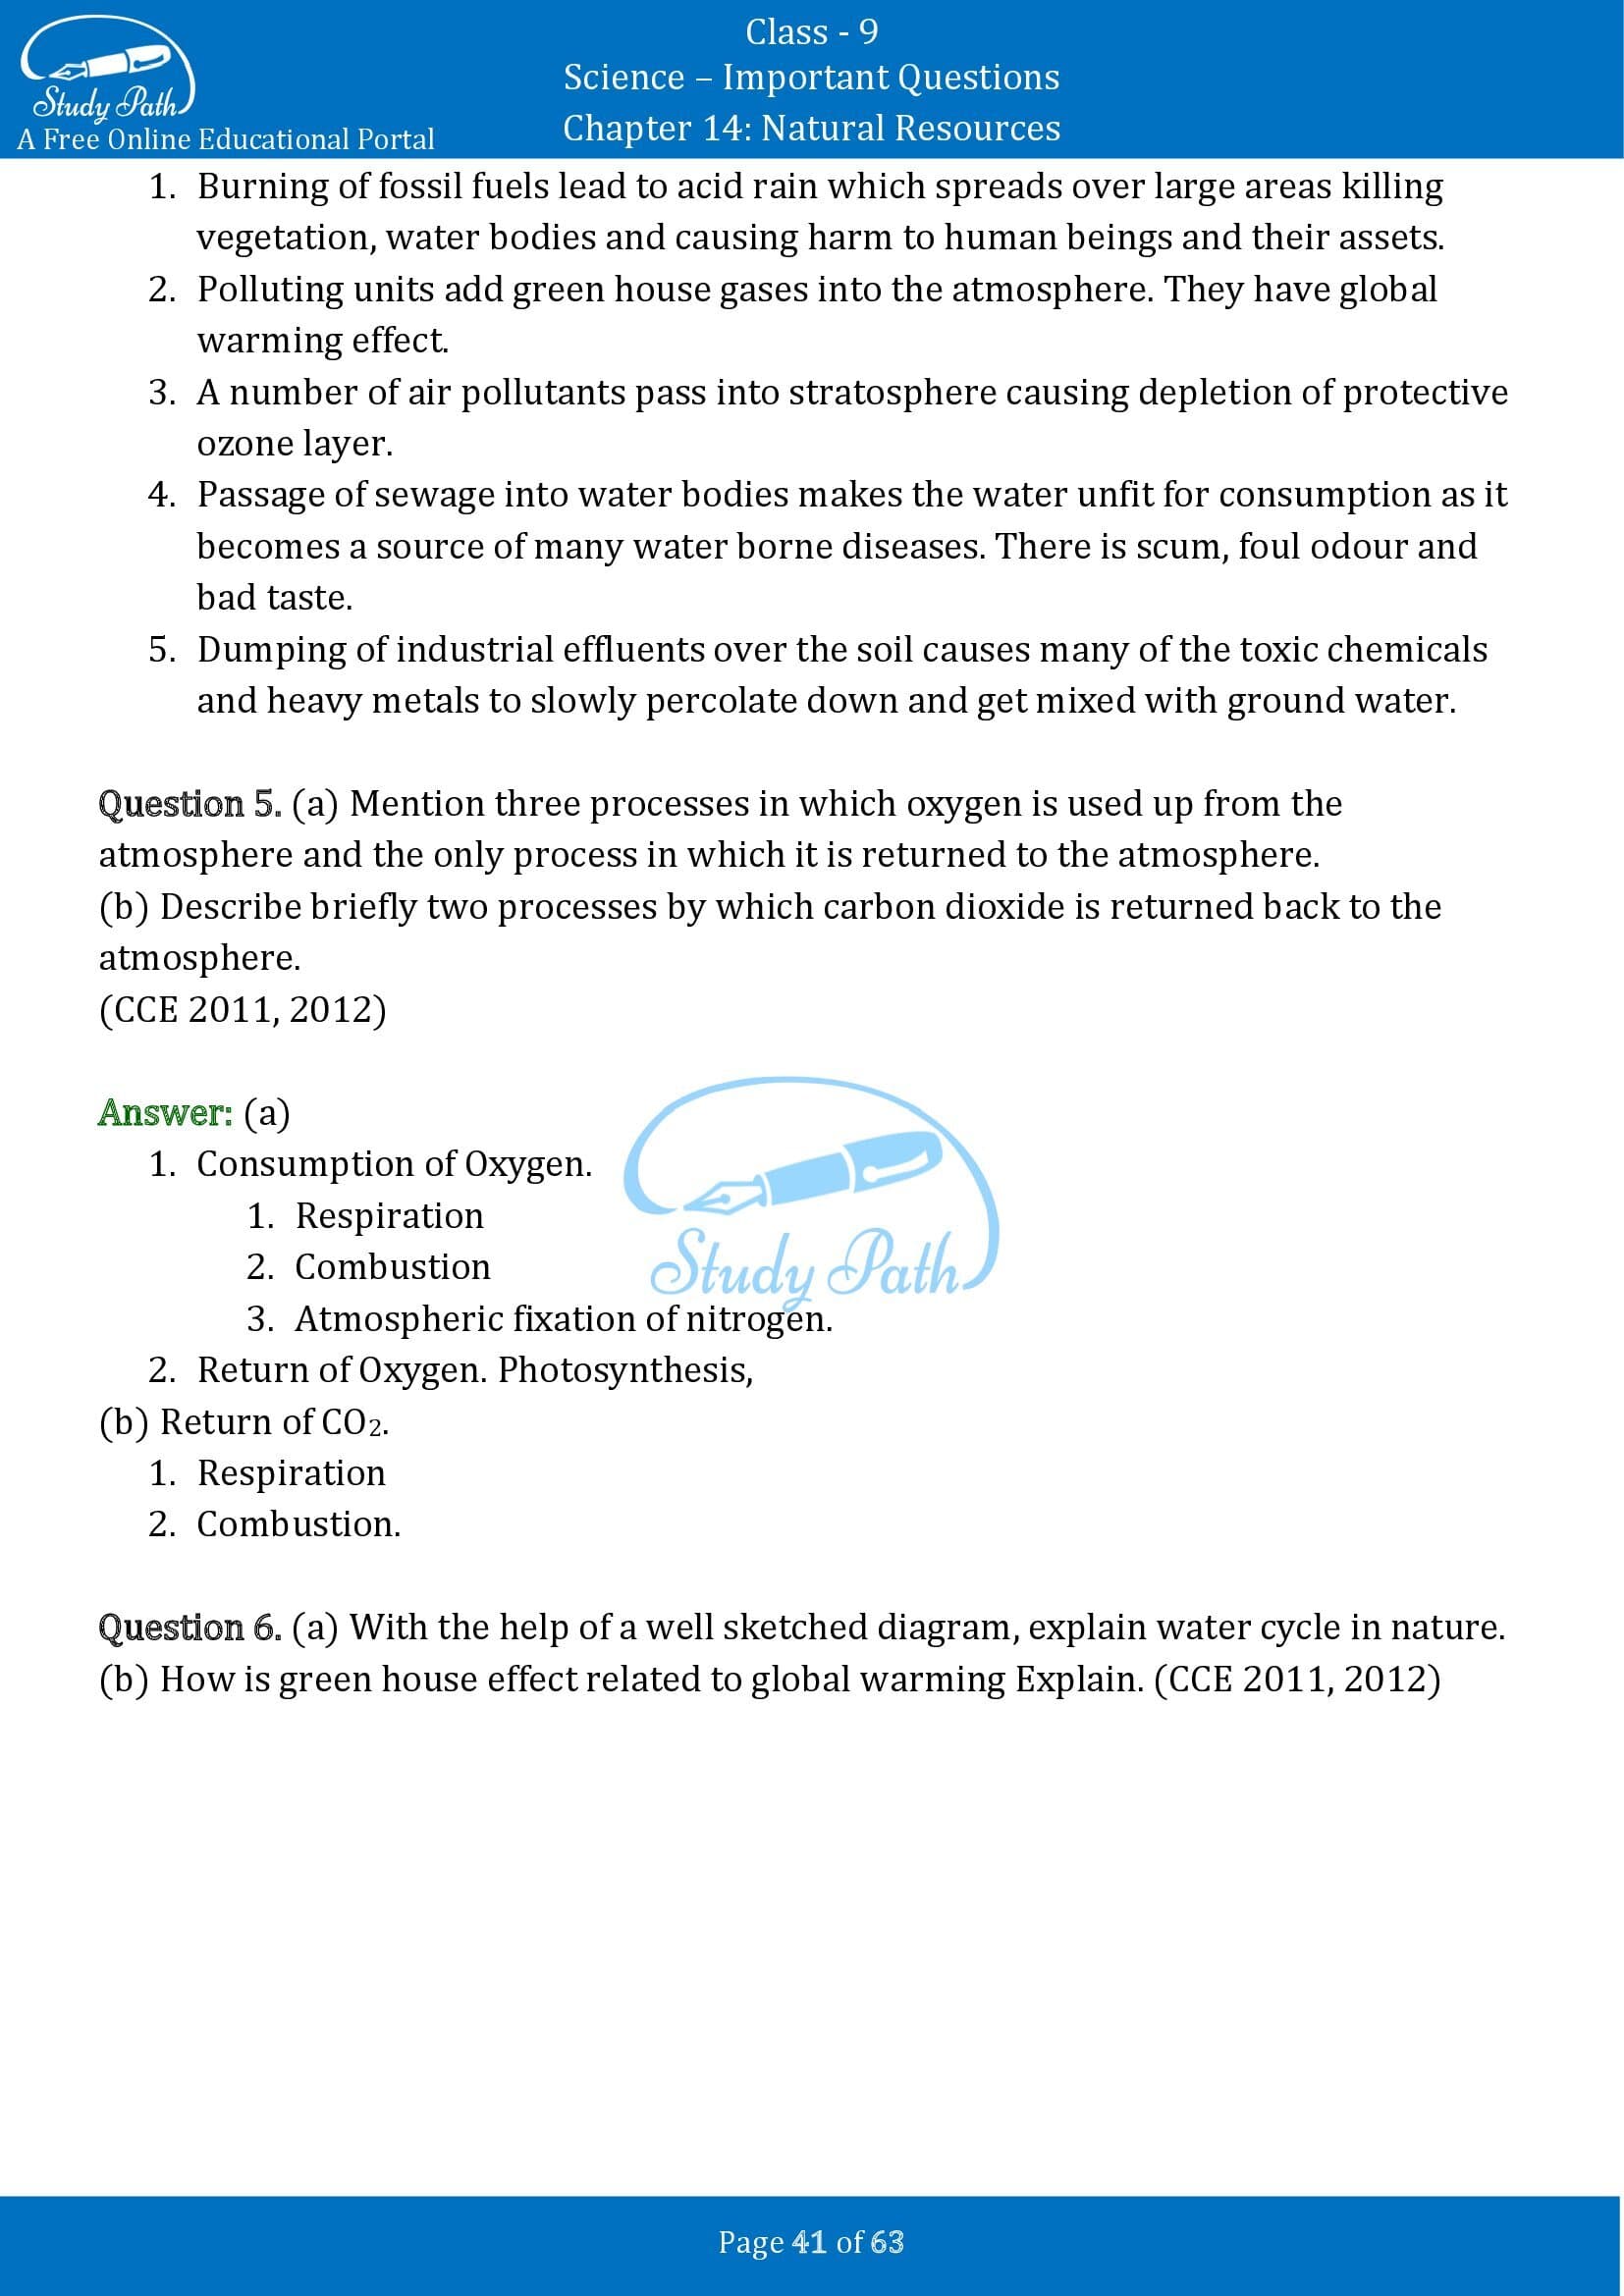 Important Questions for Class 9 Science Chapter 14 Natural Resources 00041